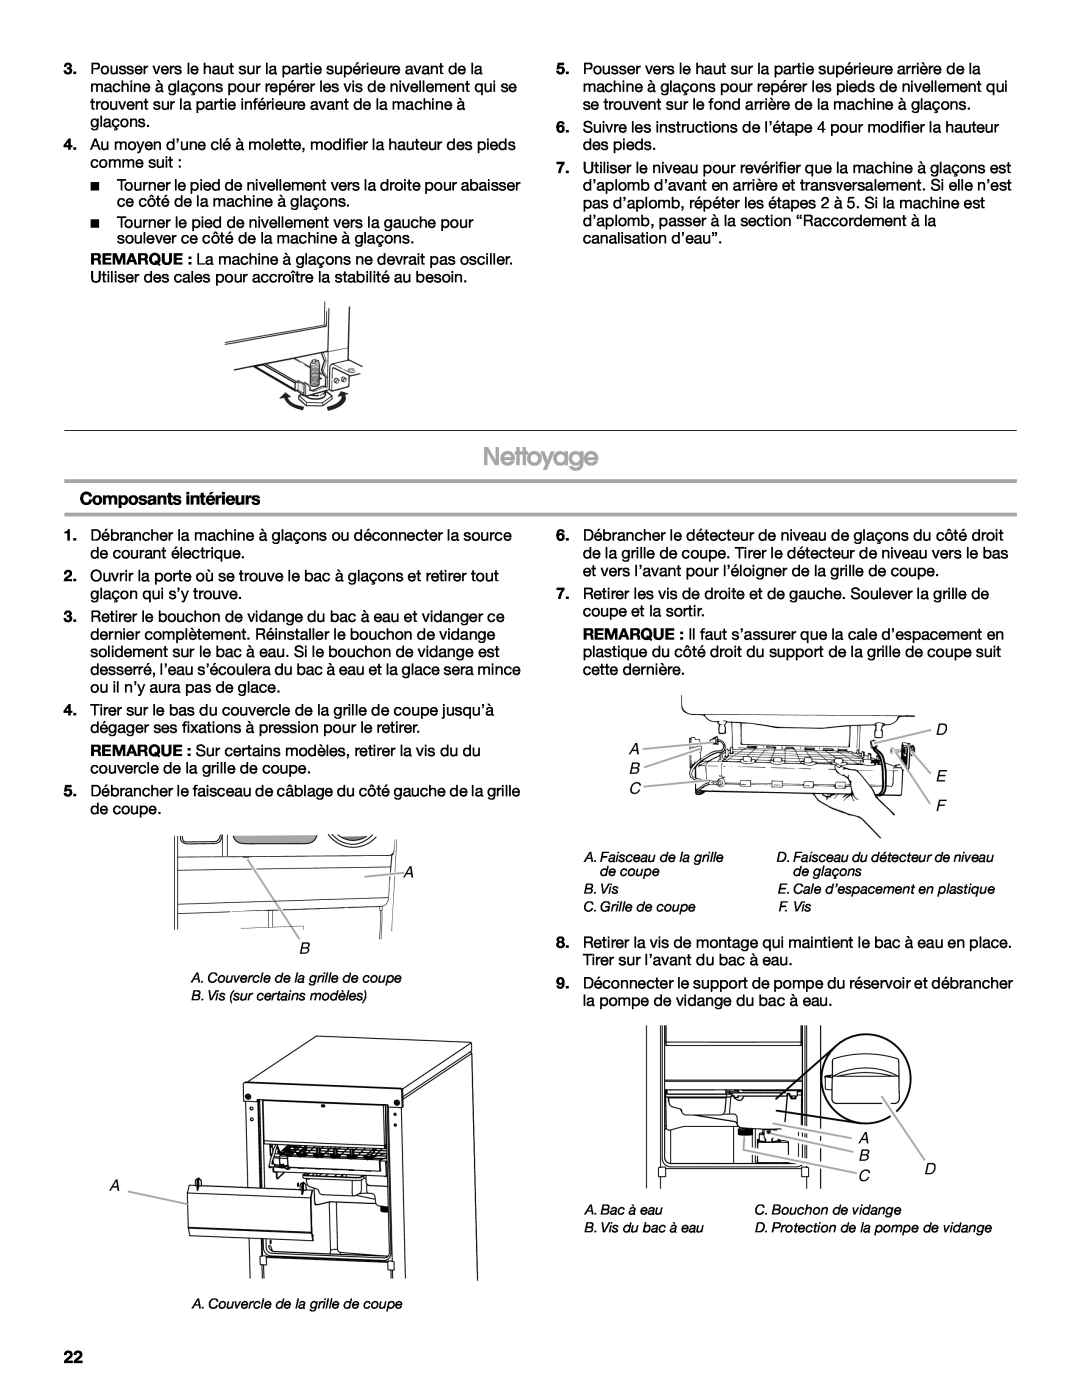 Whirlpool W10541636B important safety instructions Nettoyage, Composants intérieurs 